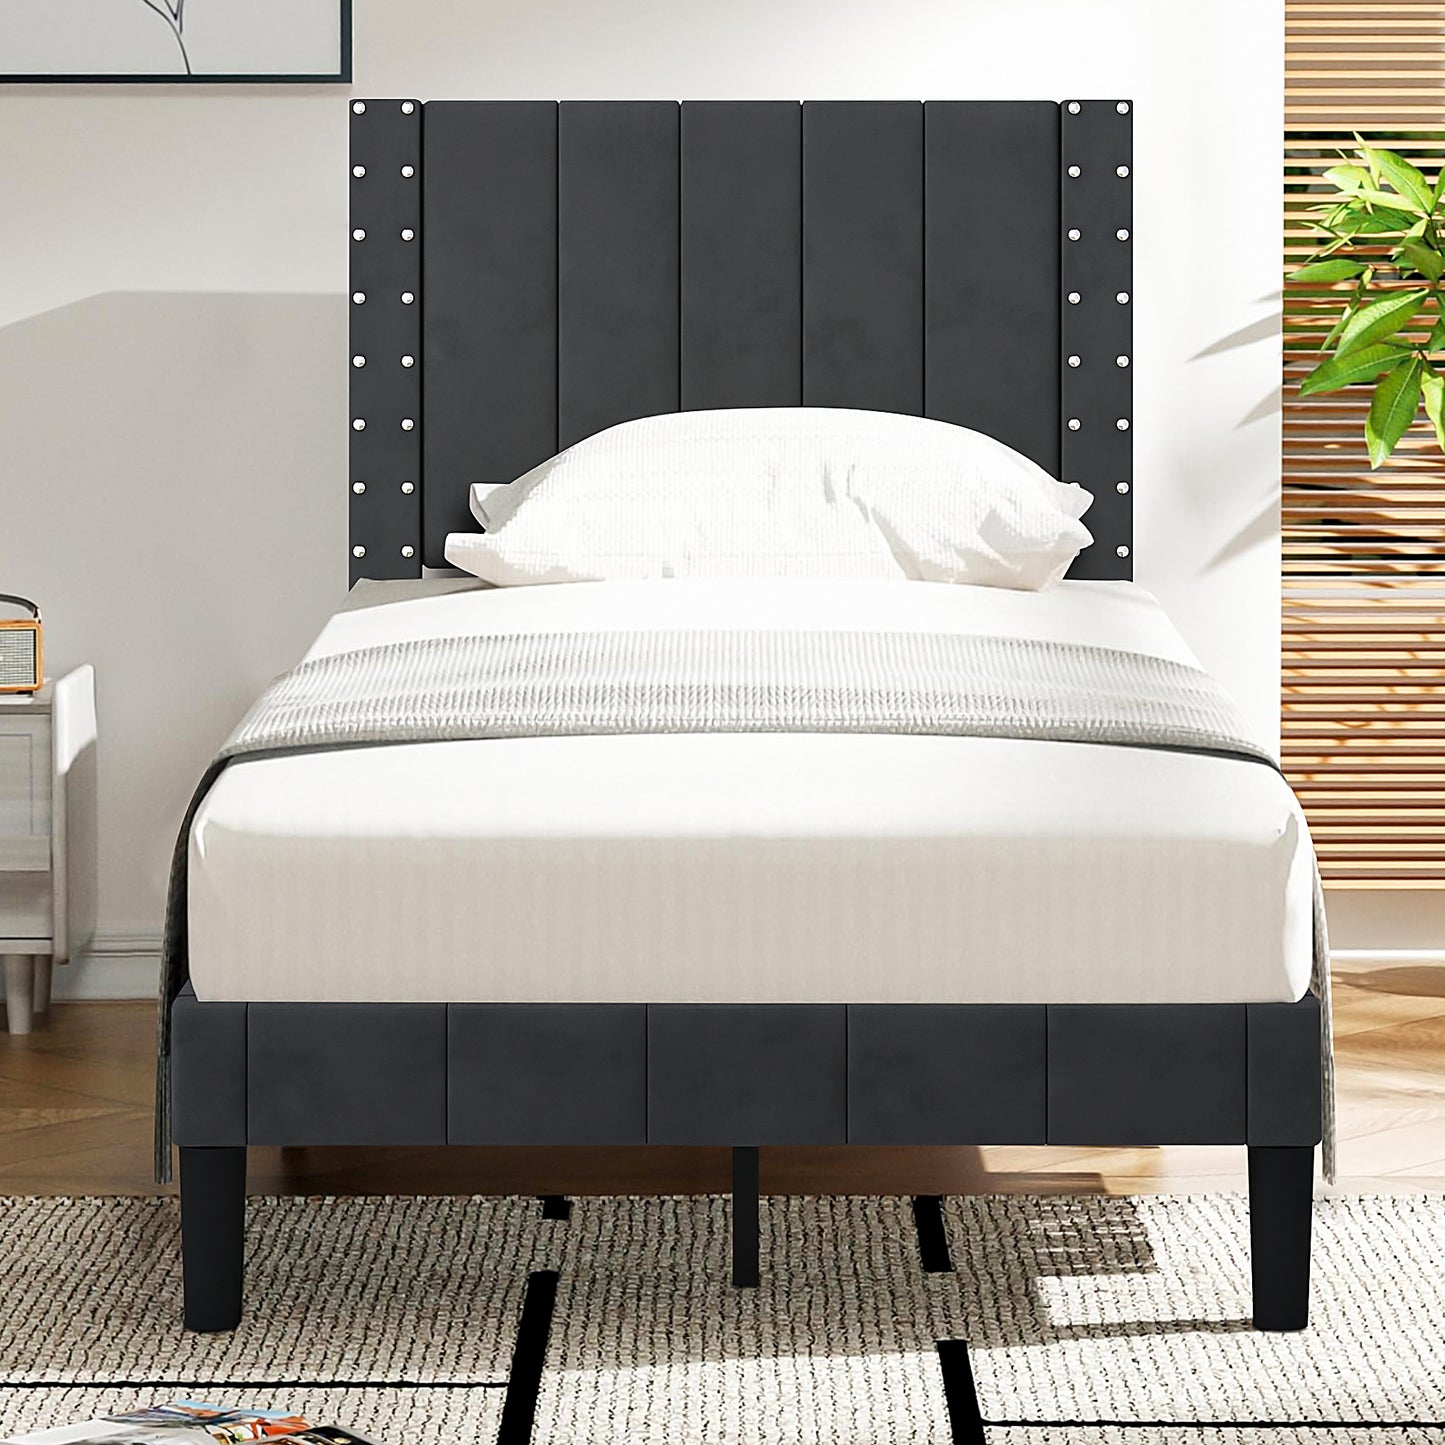 PAPROOS Full Platform Bed Frame, Upholstered Bed Frame Full Size with Vertical Channel and Rivet Decor Headboard, No Box Spring Needed, Easy Assembly, Dark Gray